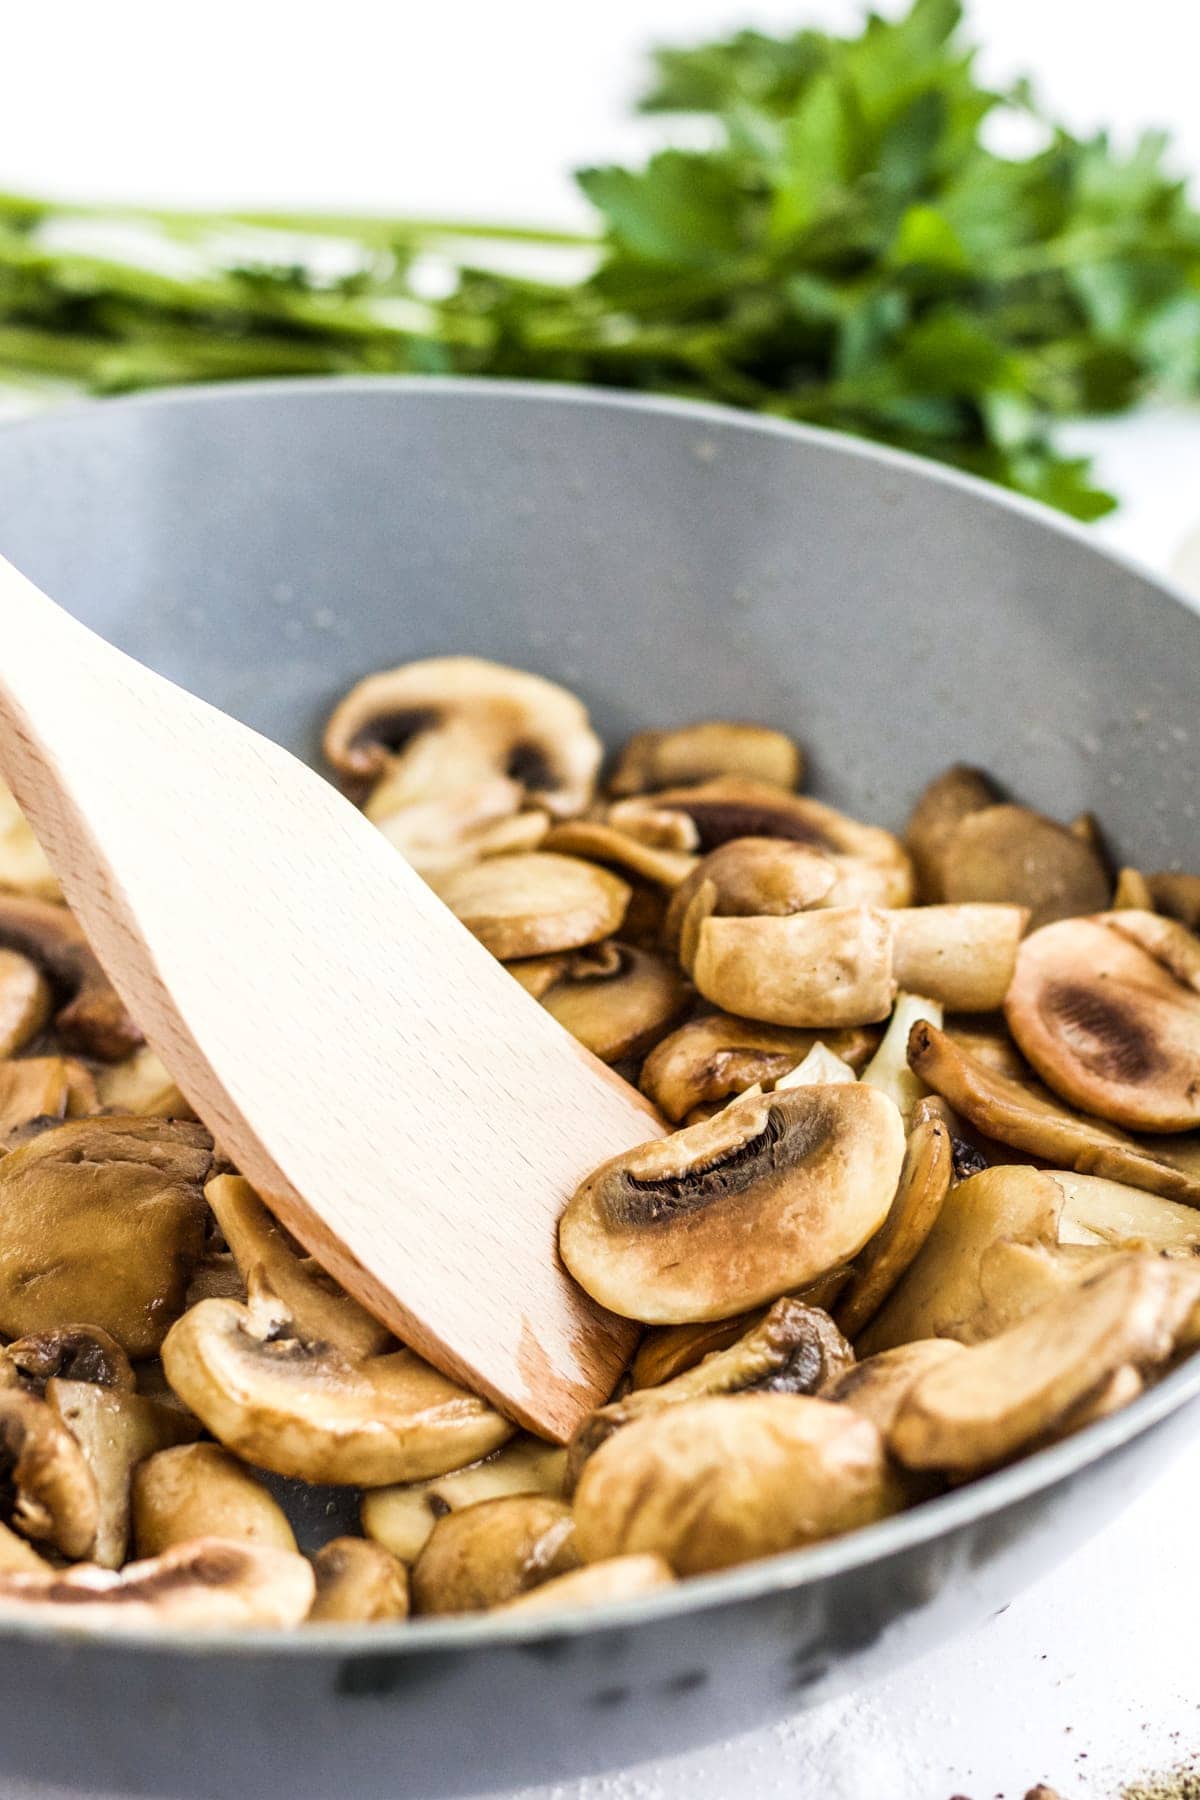 Sauteed mushrooms in a frying pan with a wooden spatula moving them around. 